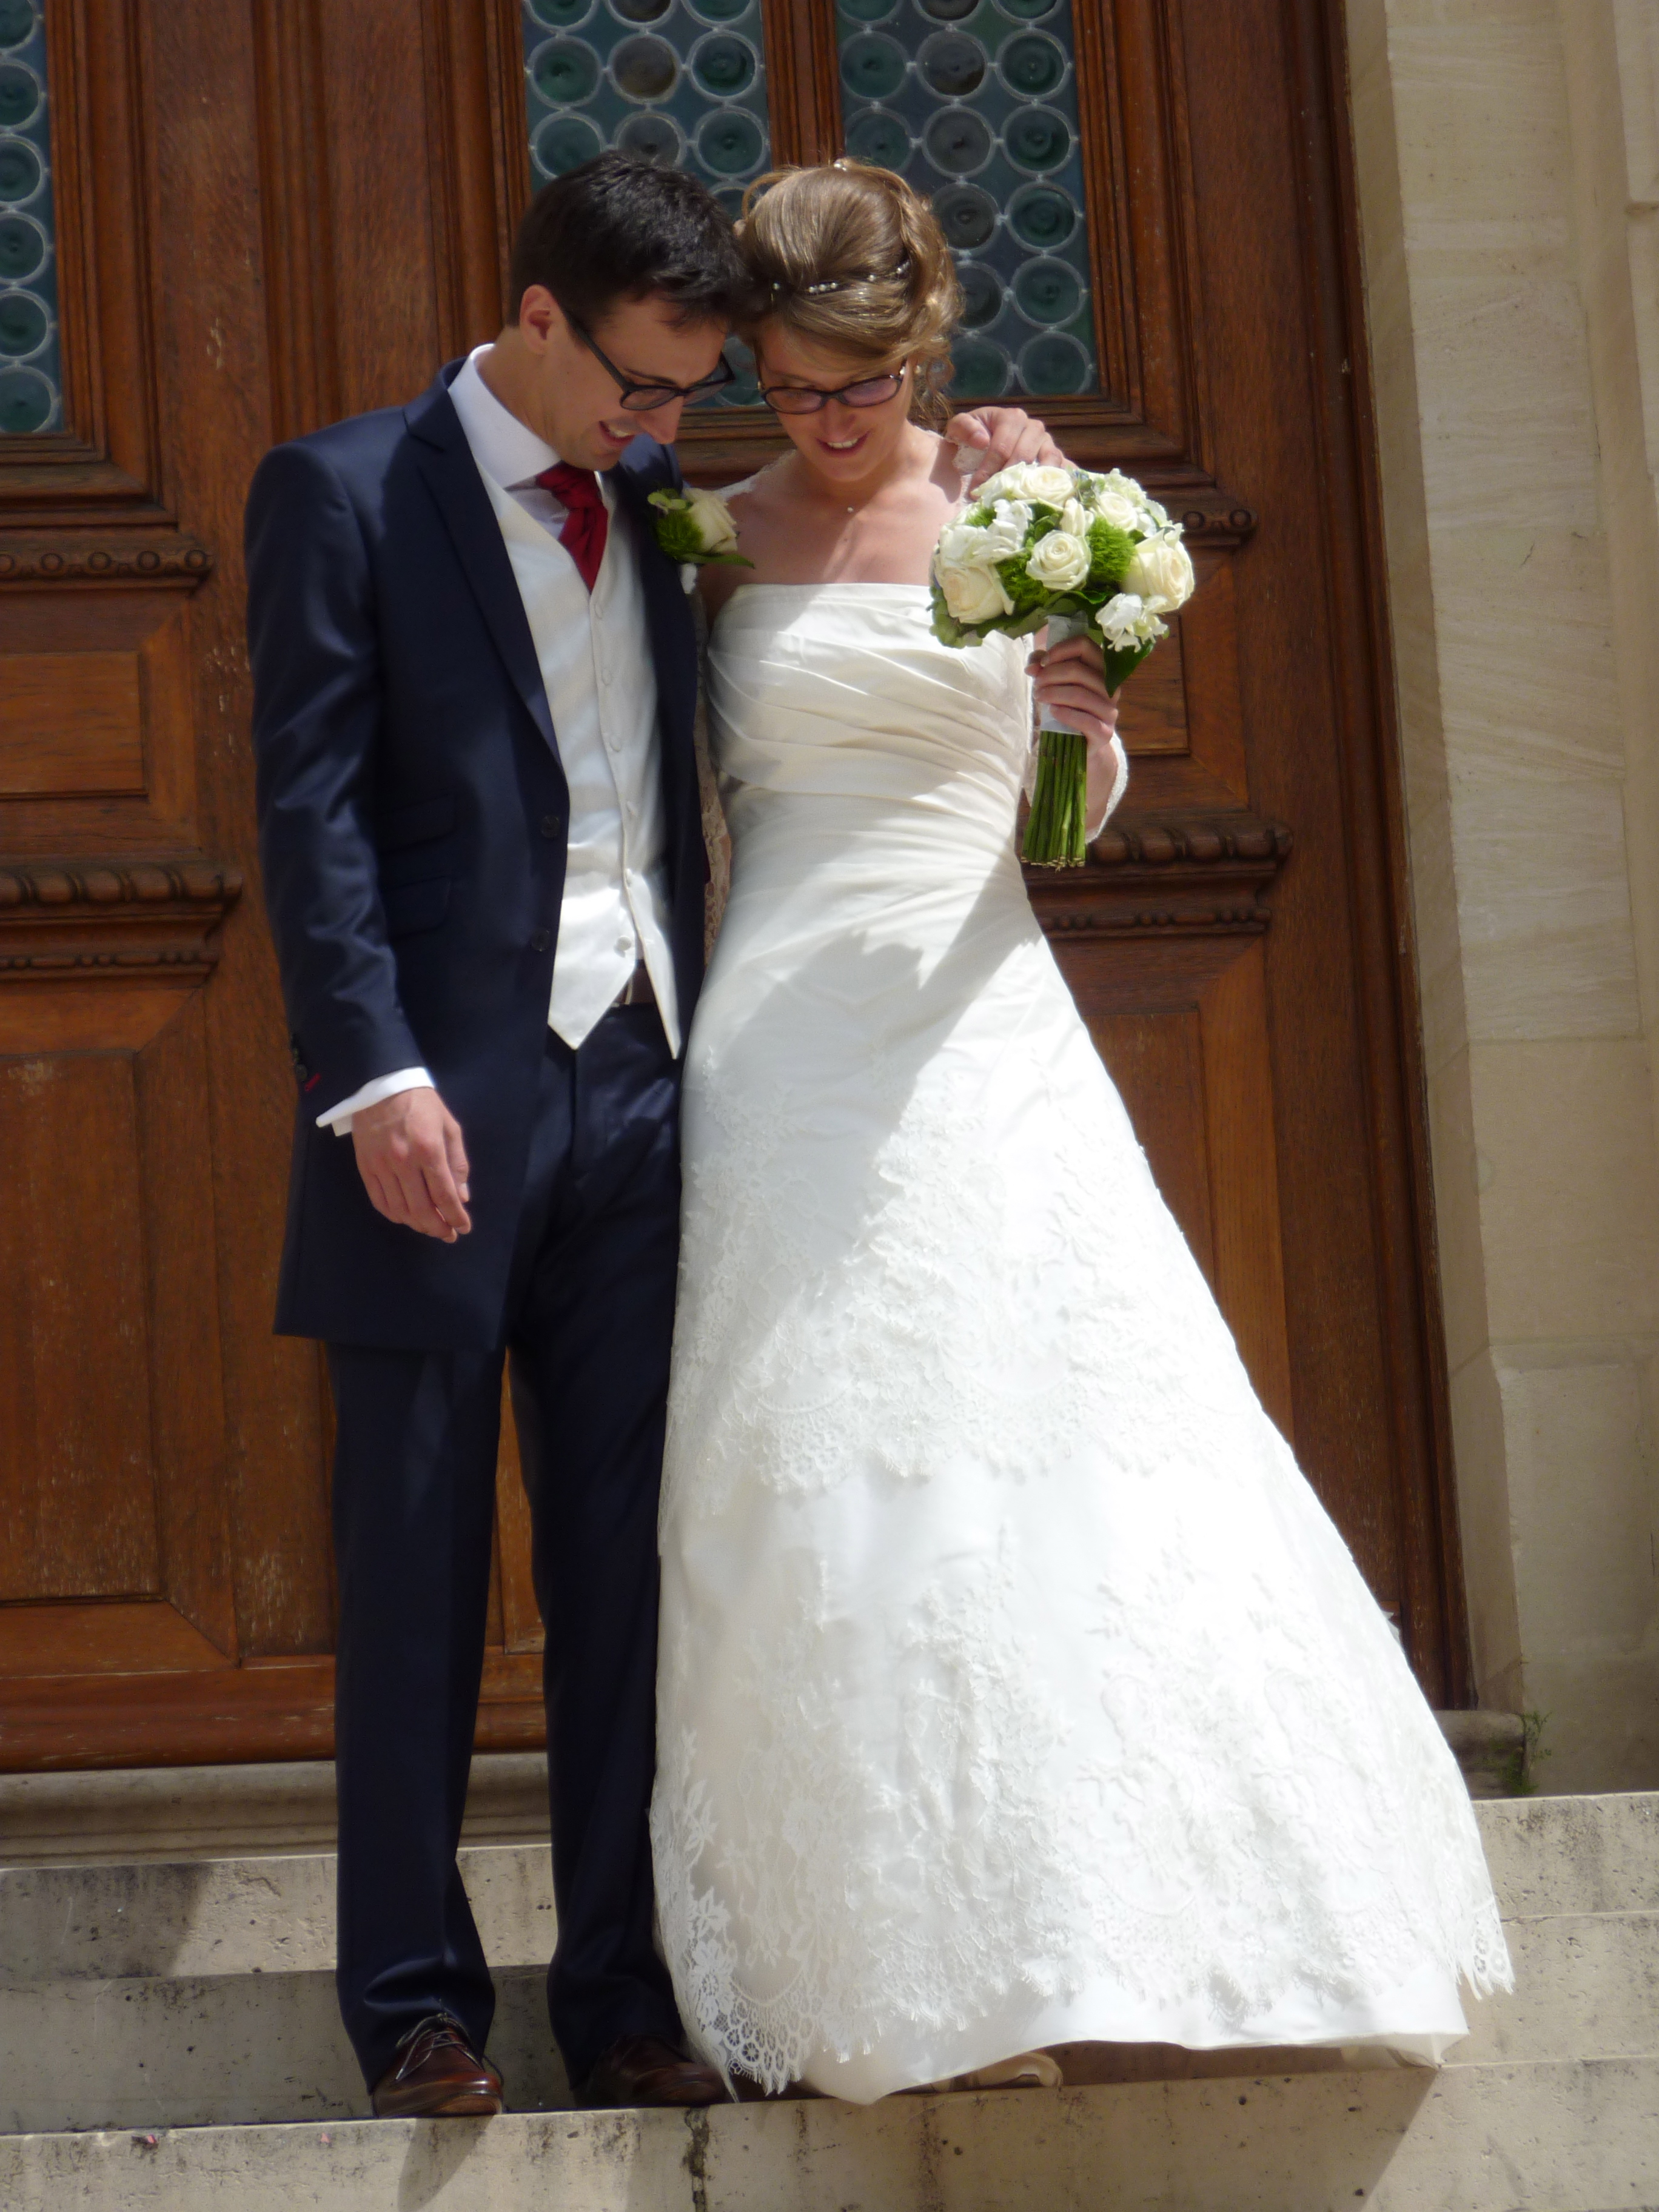 A French Wedding: A Special Experience - Finding Our Way Now